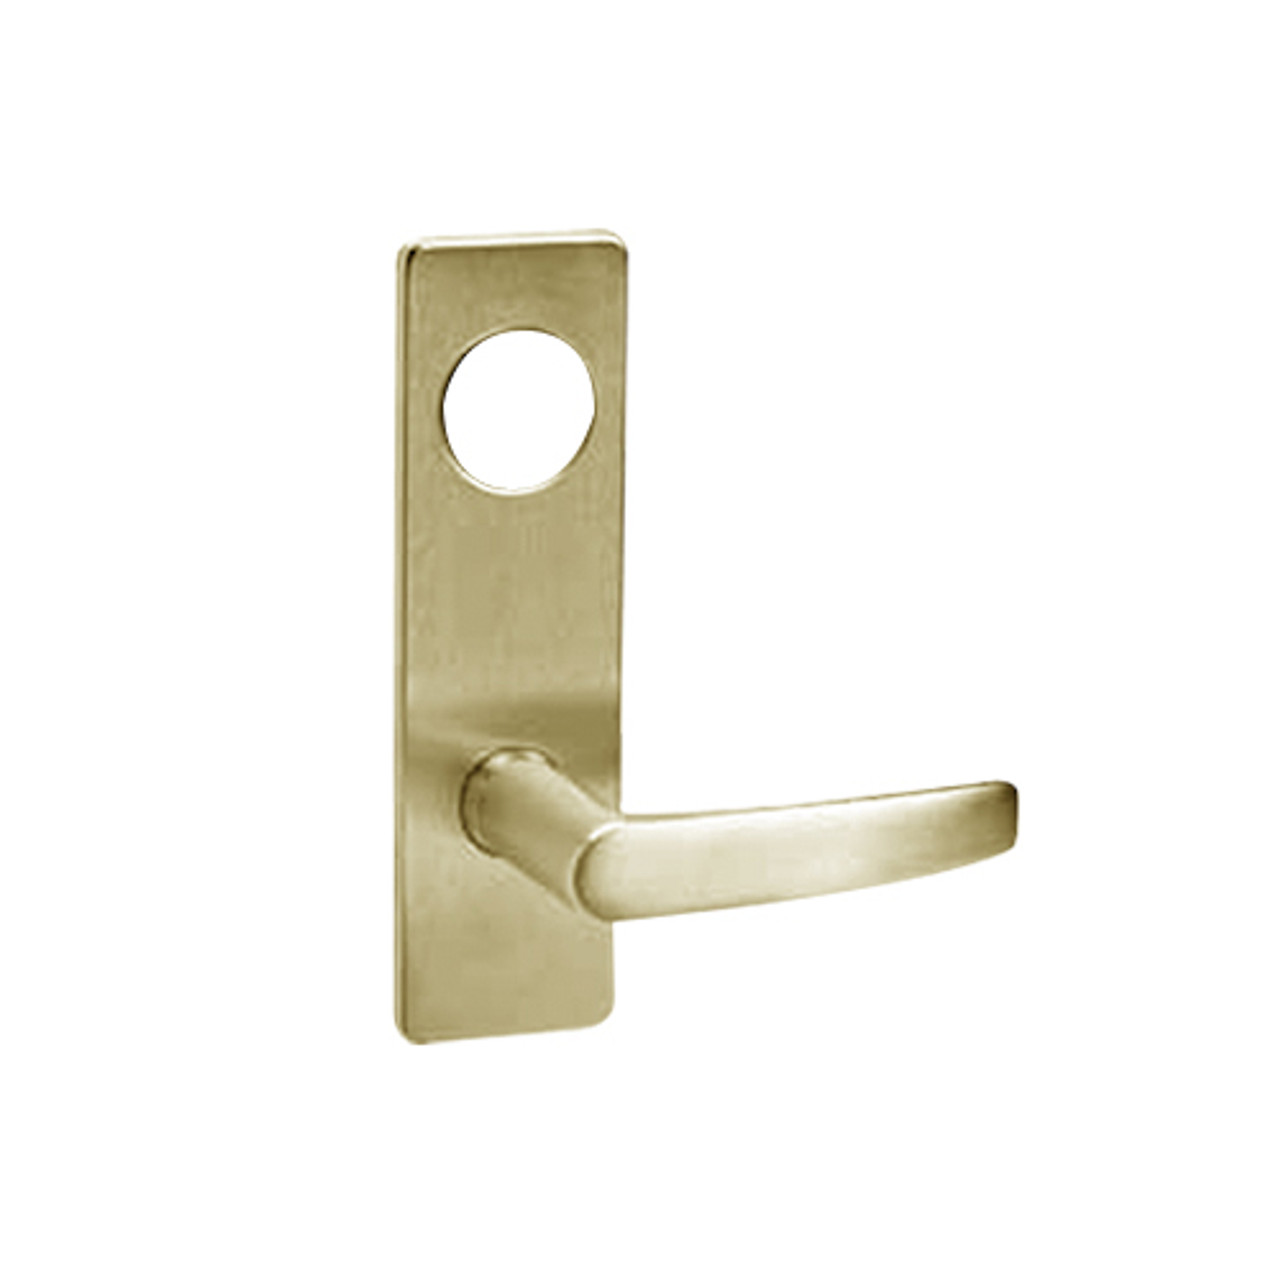 ML2055-ASN-606-LC Corbin Russwin ML2000 Series Mortise Classroom Locksets with Armstrong Lever in Satin Brass